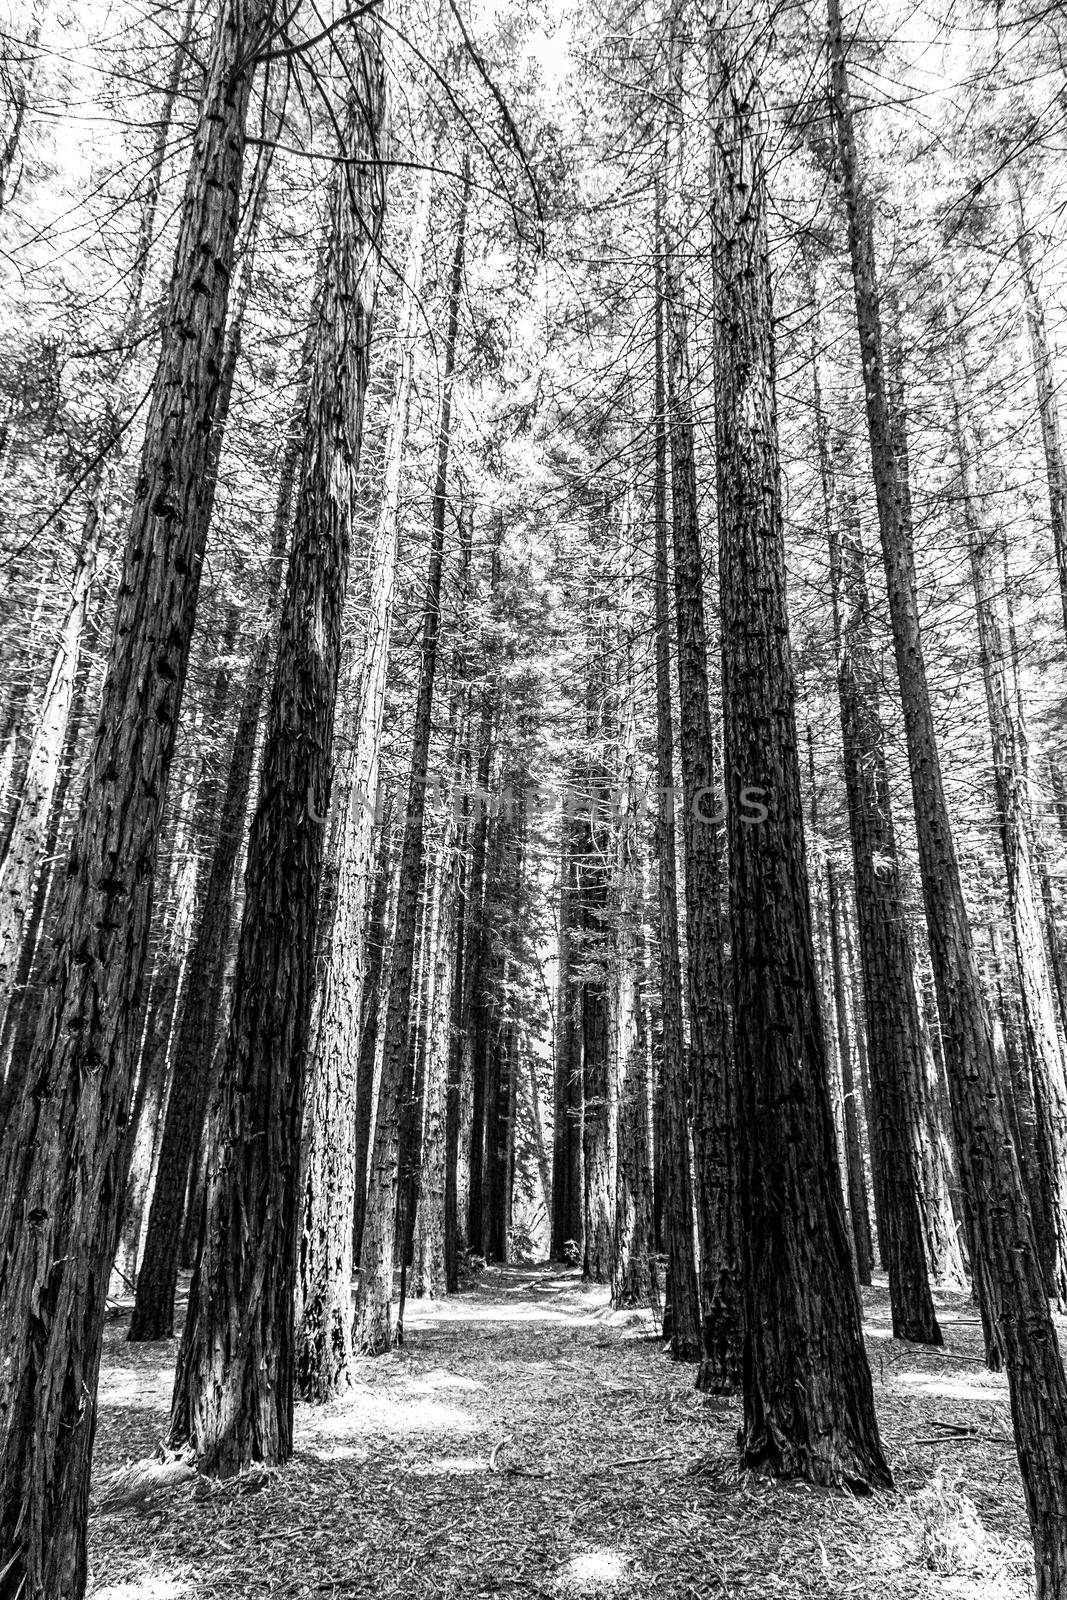 Rows of trees in Redwood Forest are a tourist icon for nature lovers and photography. Redwoods were planted in Warburton in the Yarra Valley in the 1930s. Melbourne, Australia by bettercallcurry